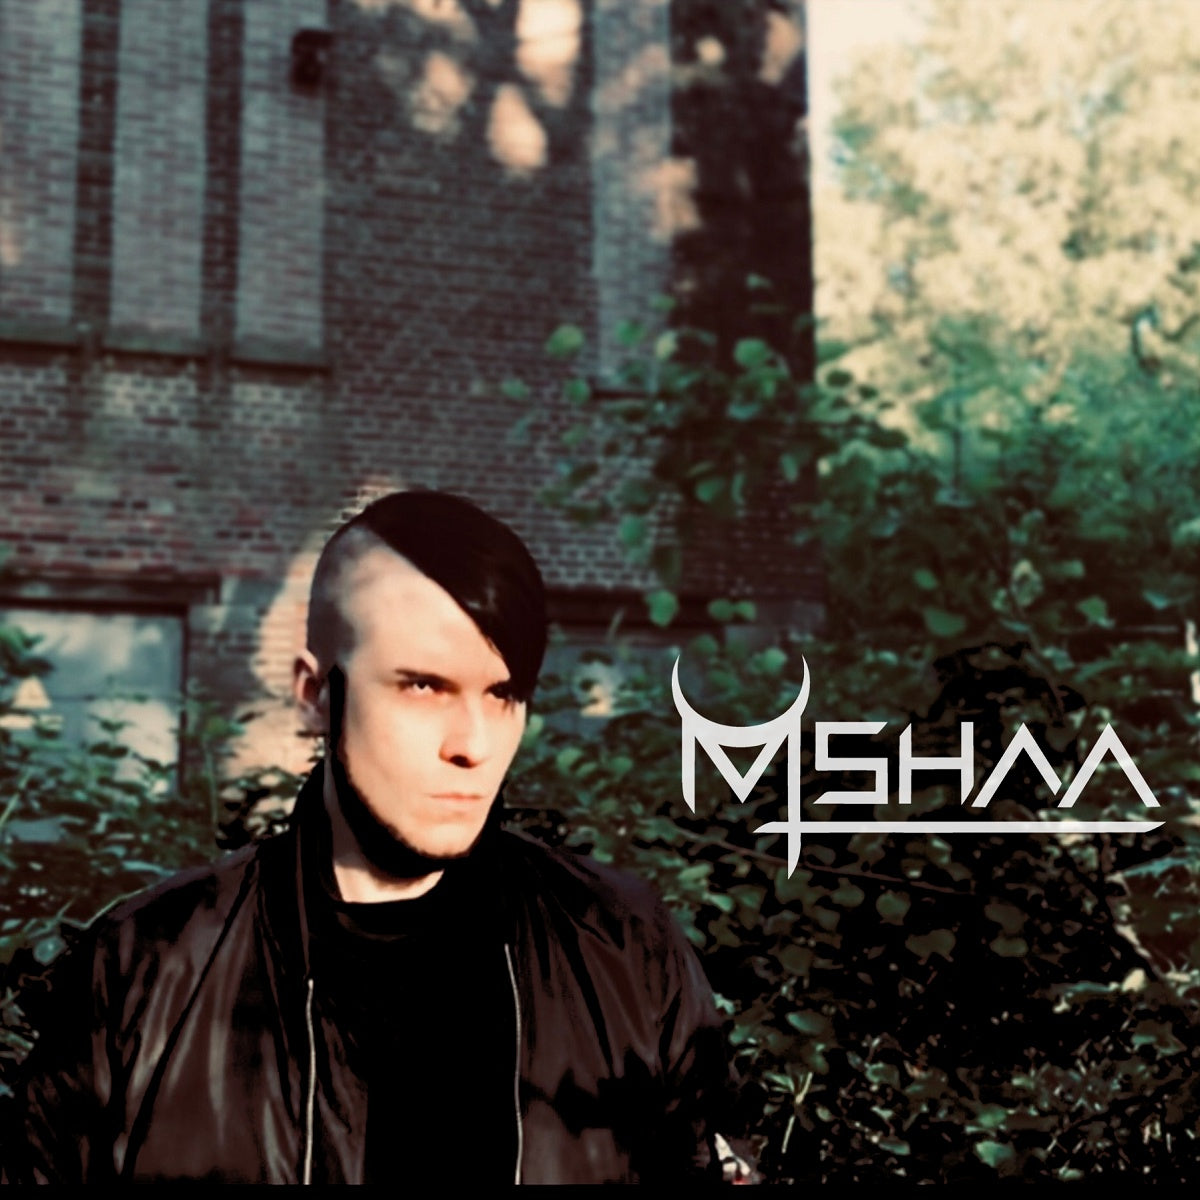 An Interview With MSHAA